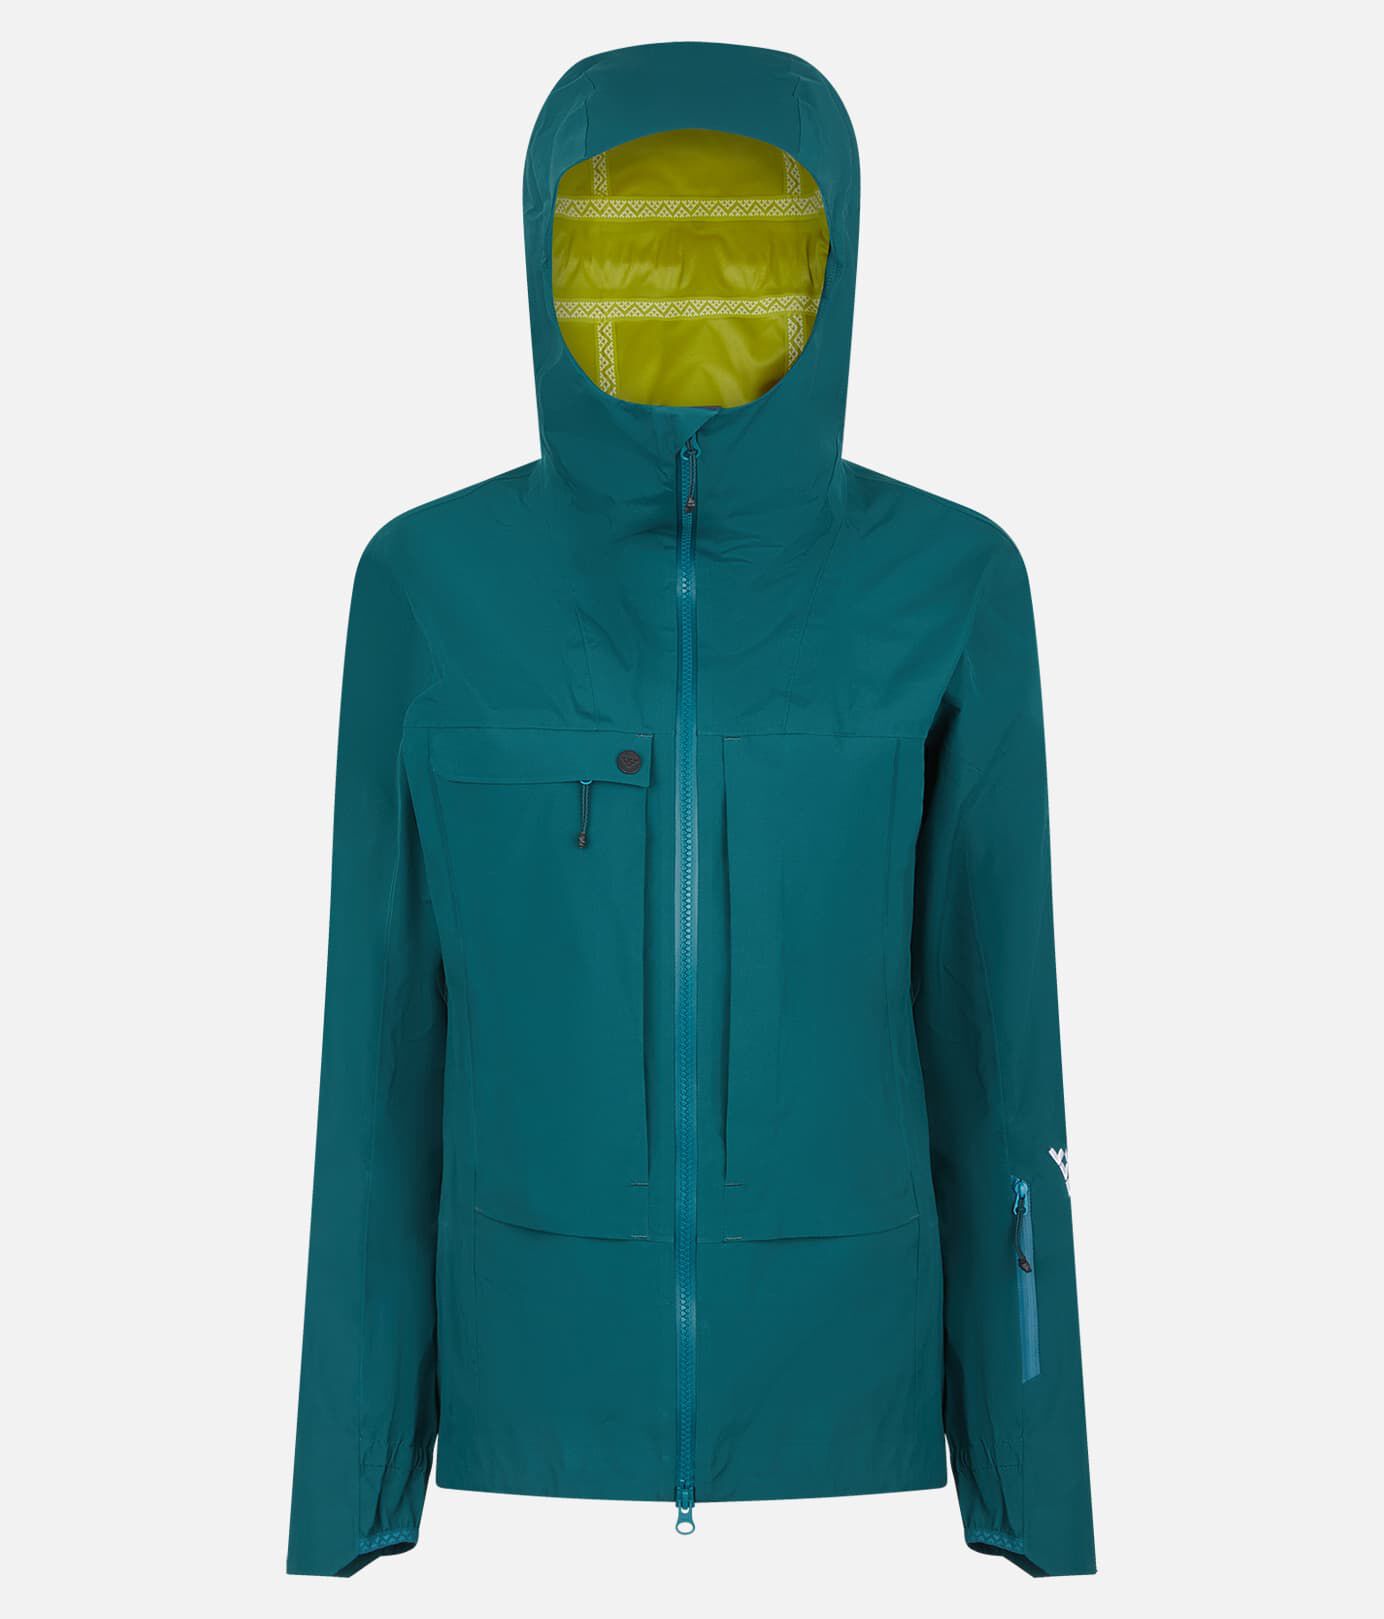 Buy Green Jackets & Coats for Women by Fort Collins Online | Ajio.com